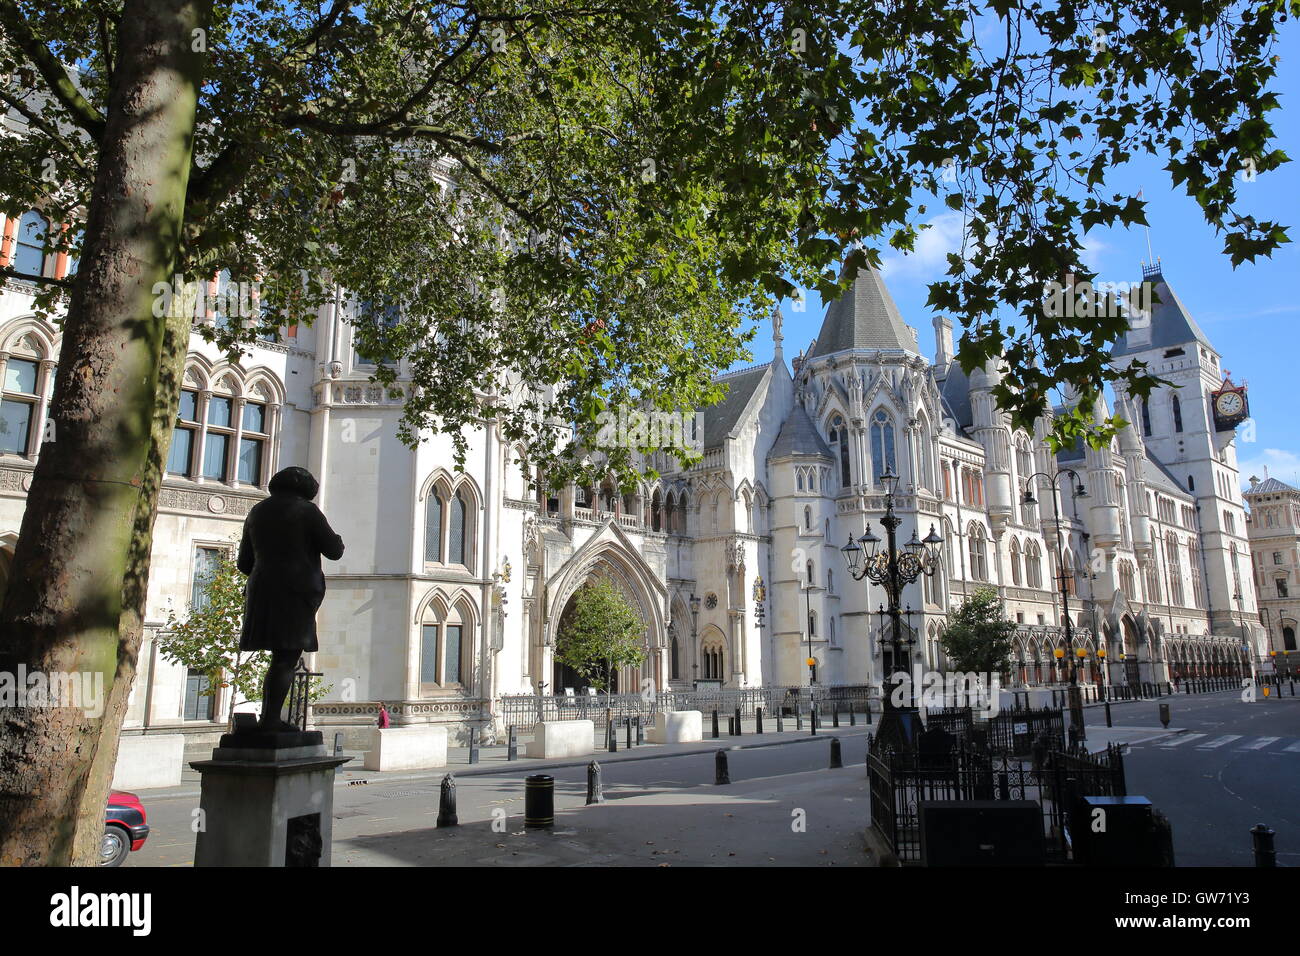 The Royal Courts of Justice from the Strand, London, Great Britain Stock Photo